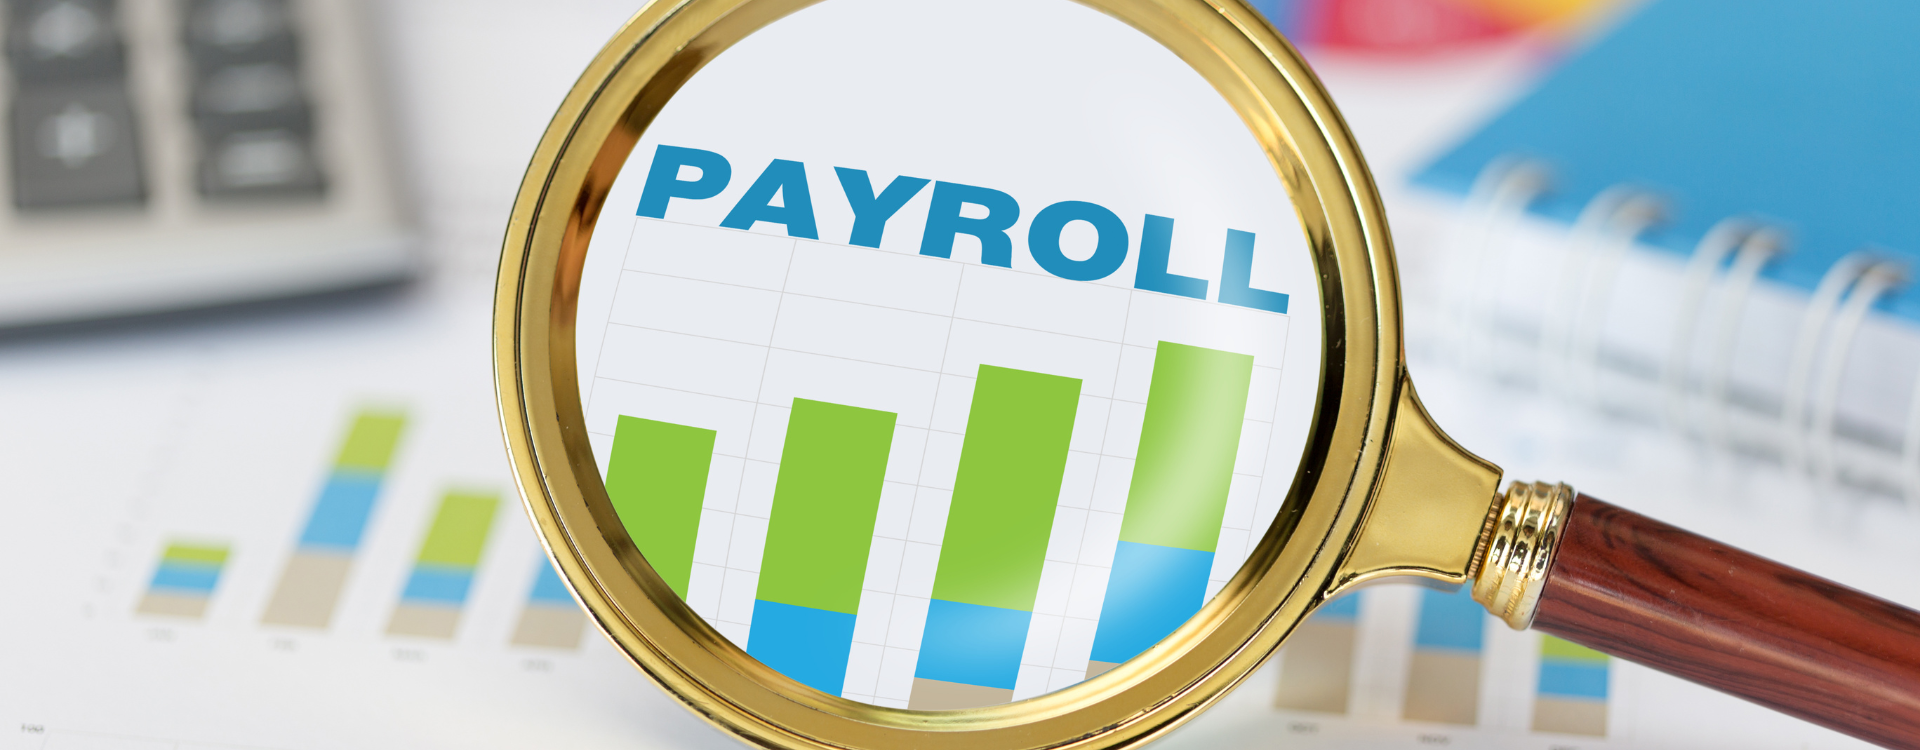 Ways to improve payroll services